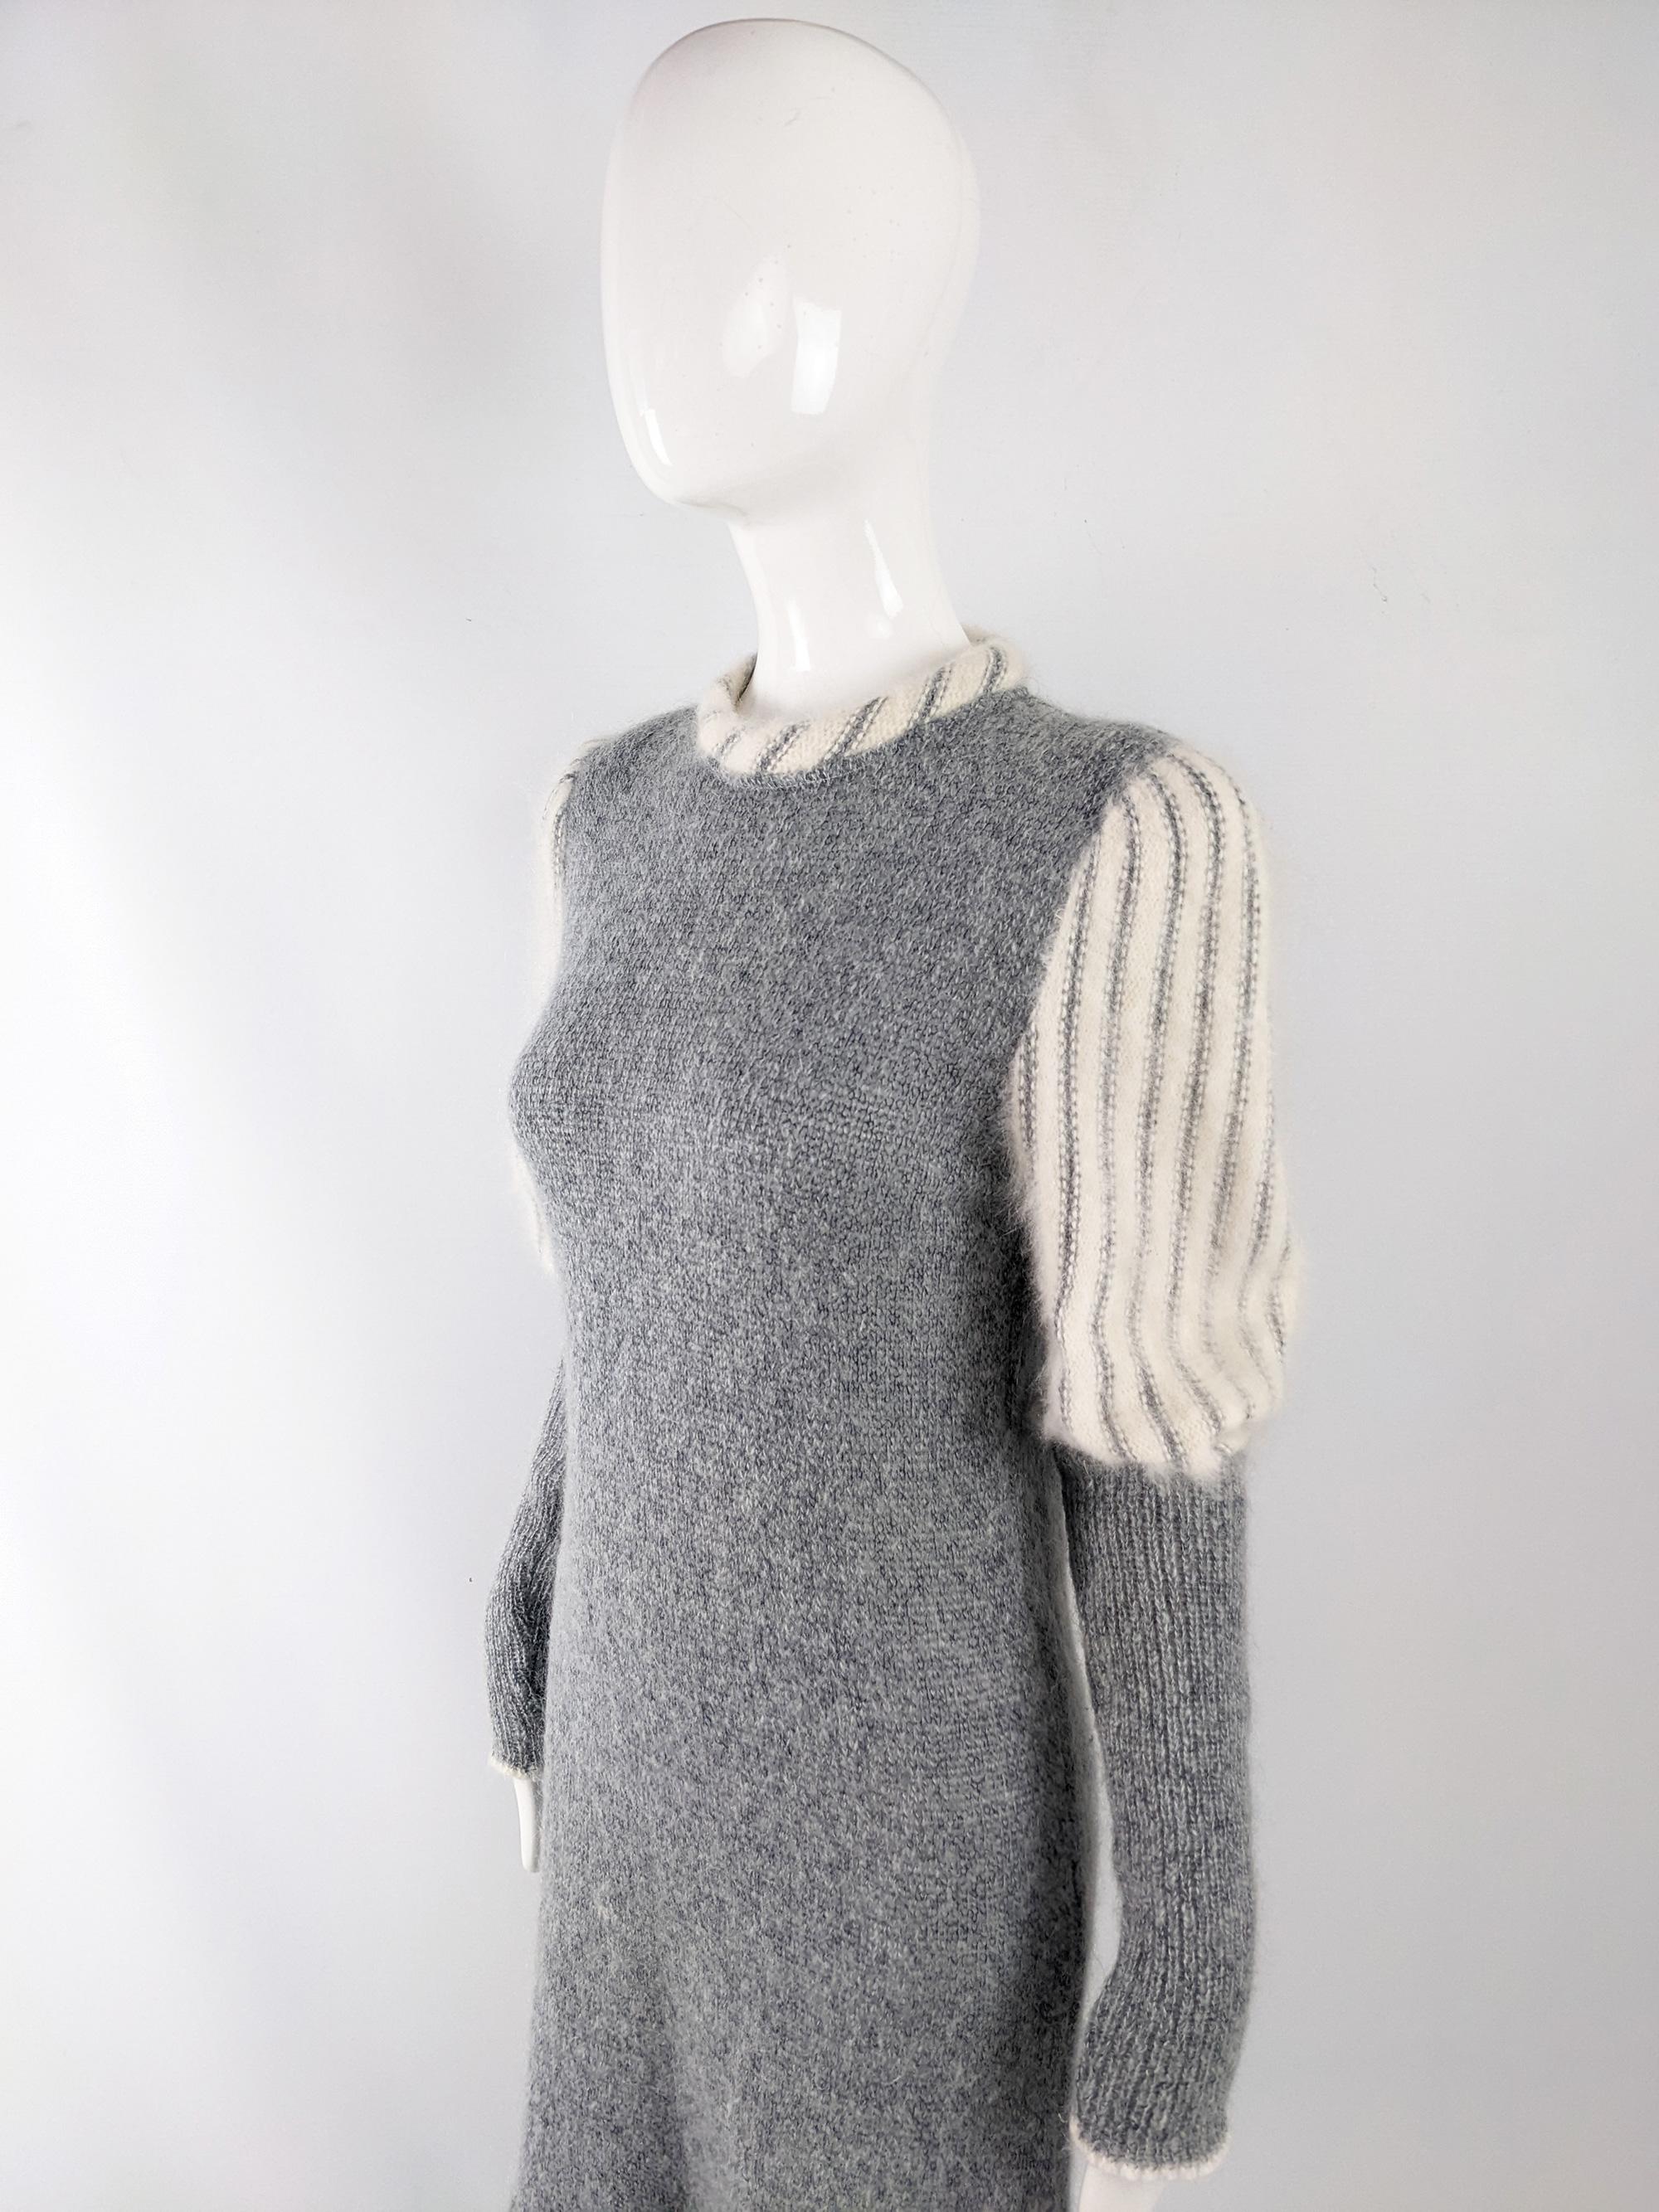 Carven Paris Vintage Grey & Cream 70s Puff Sleeve Mohair Wool Knit Dress, 1970s In Good Condition For Sale In Doncaster, South Yorkshire